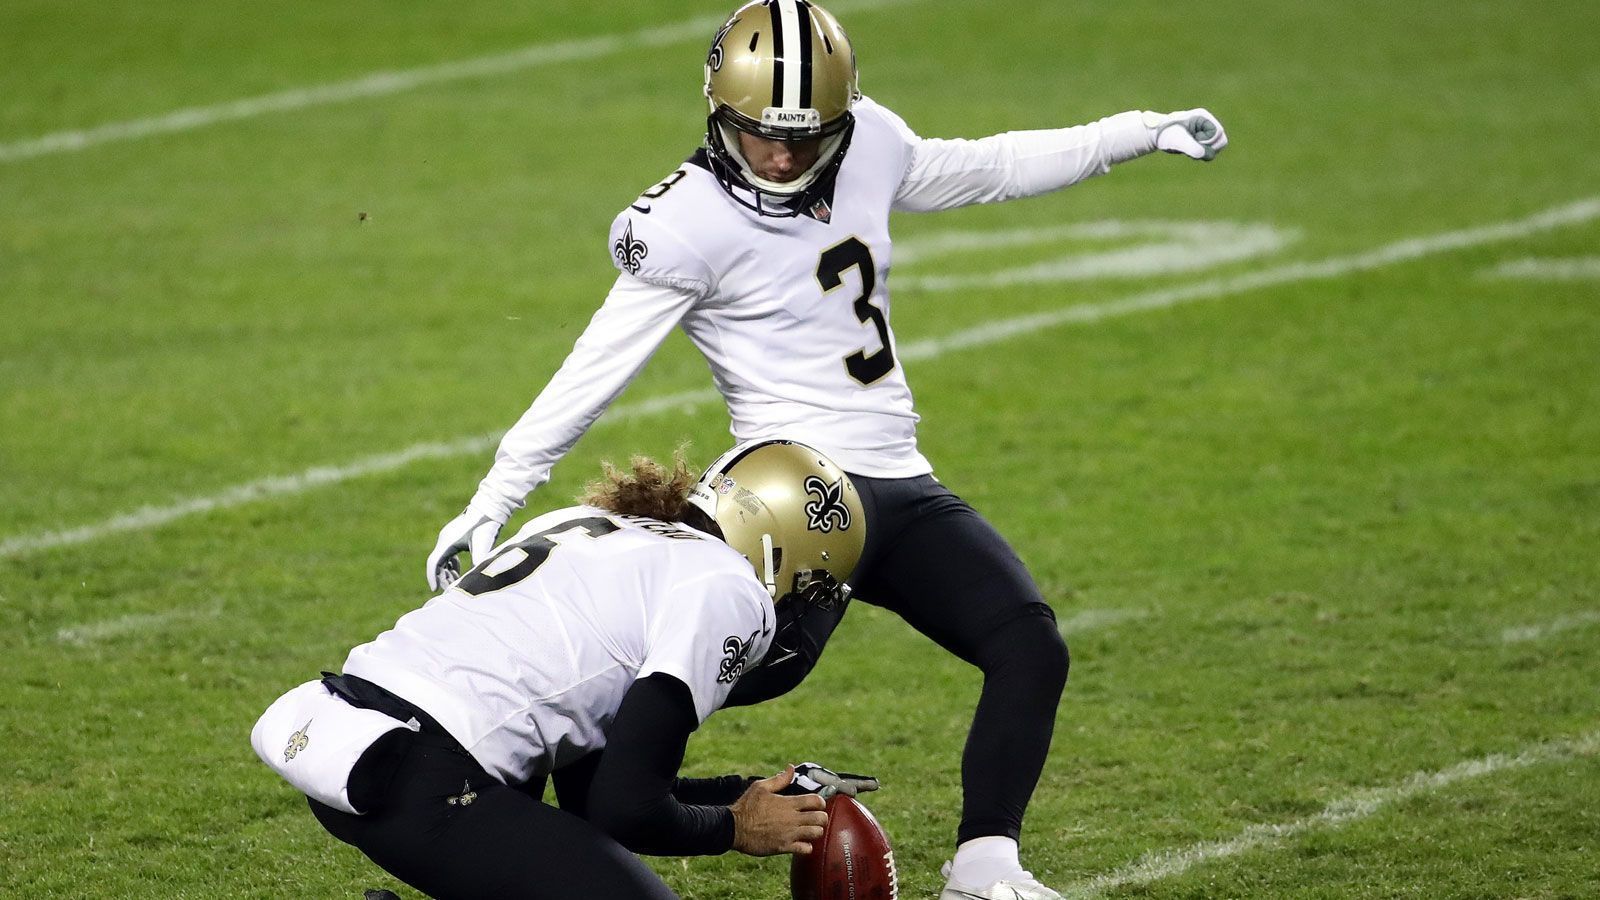 
                <strong>Platz 10 (geteilt): Wil Lutz</strong><br>
                &#x2022; Team: New Orleans Saints<br>&#x2022; <strong>Overall Rating: 78</strong><br>&#x2022; Key Stats: Kick Power: 96 – Kick Accuracy: 86 – Stamina: 79<br>
              